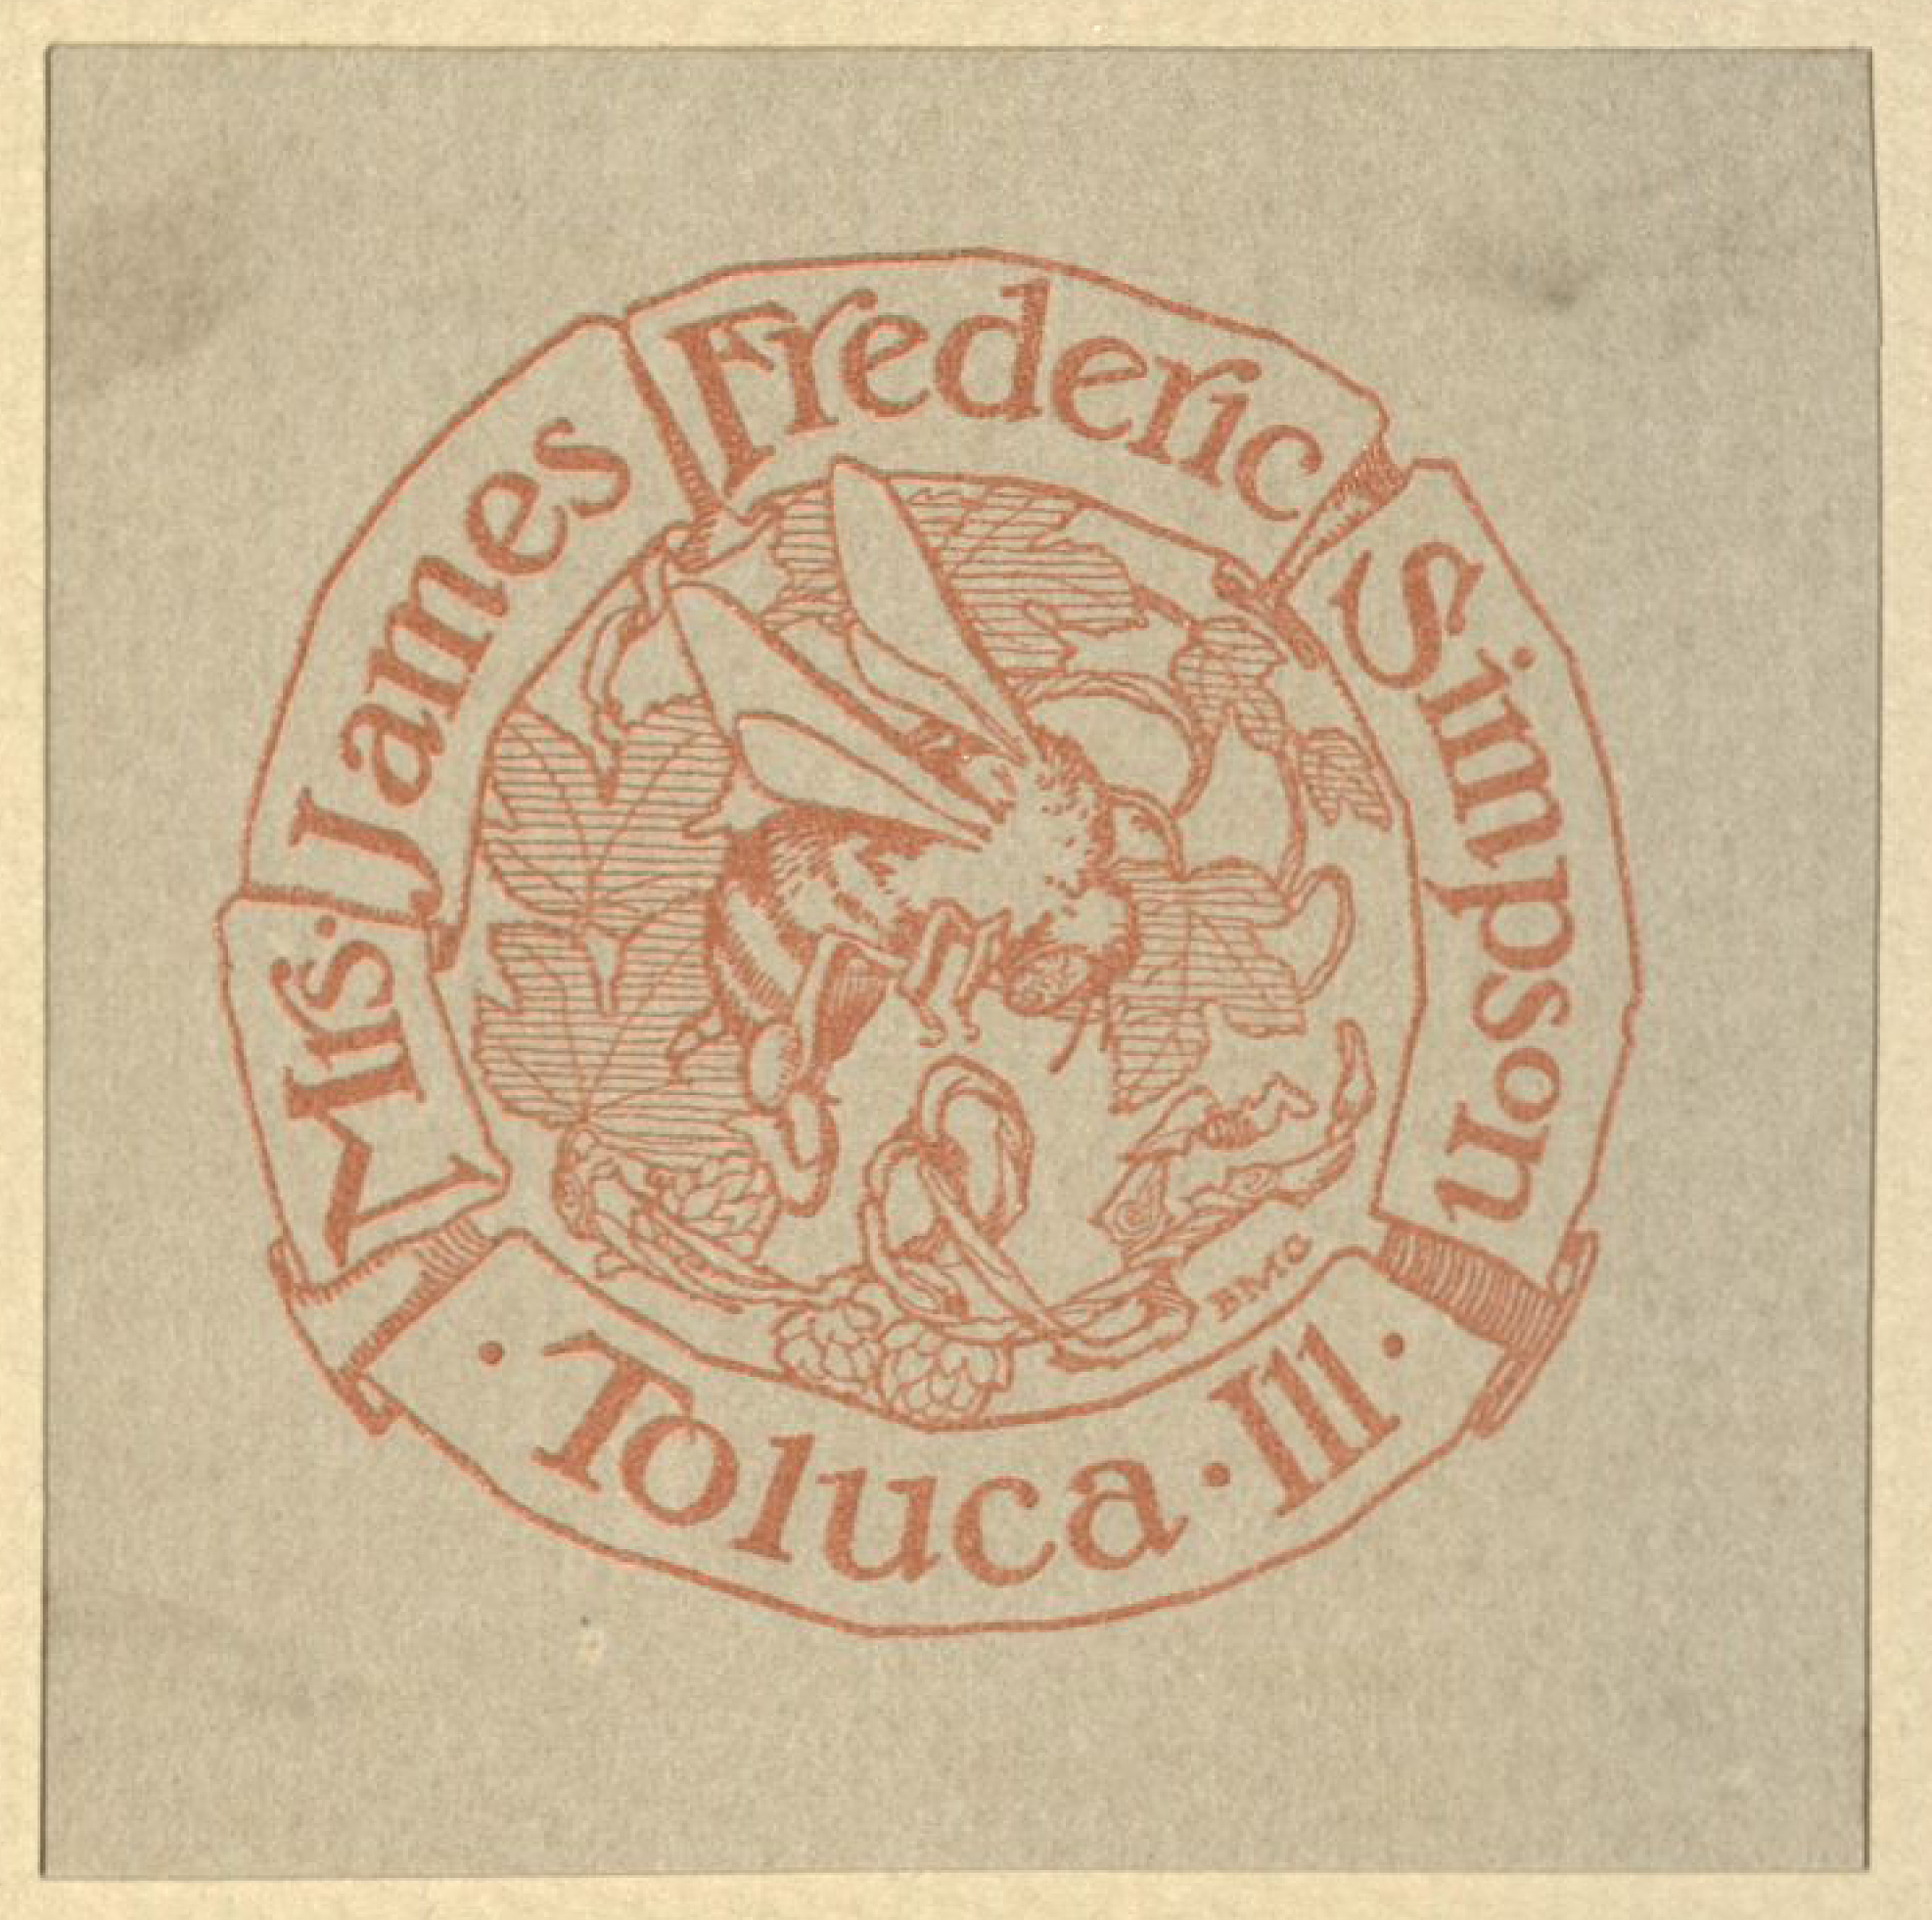 Bookplate of Mrs. James Frederic Simpson.